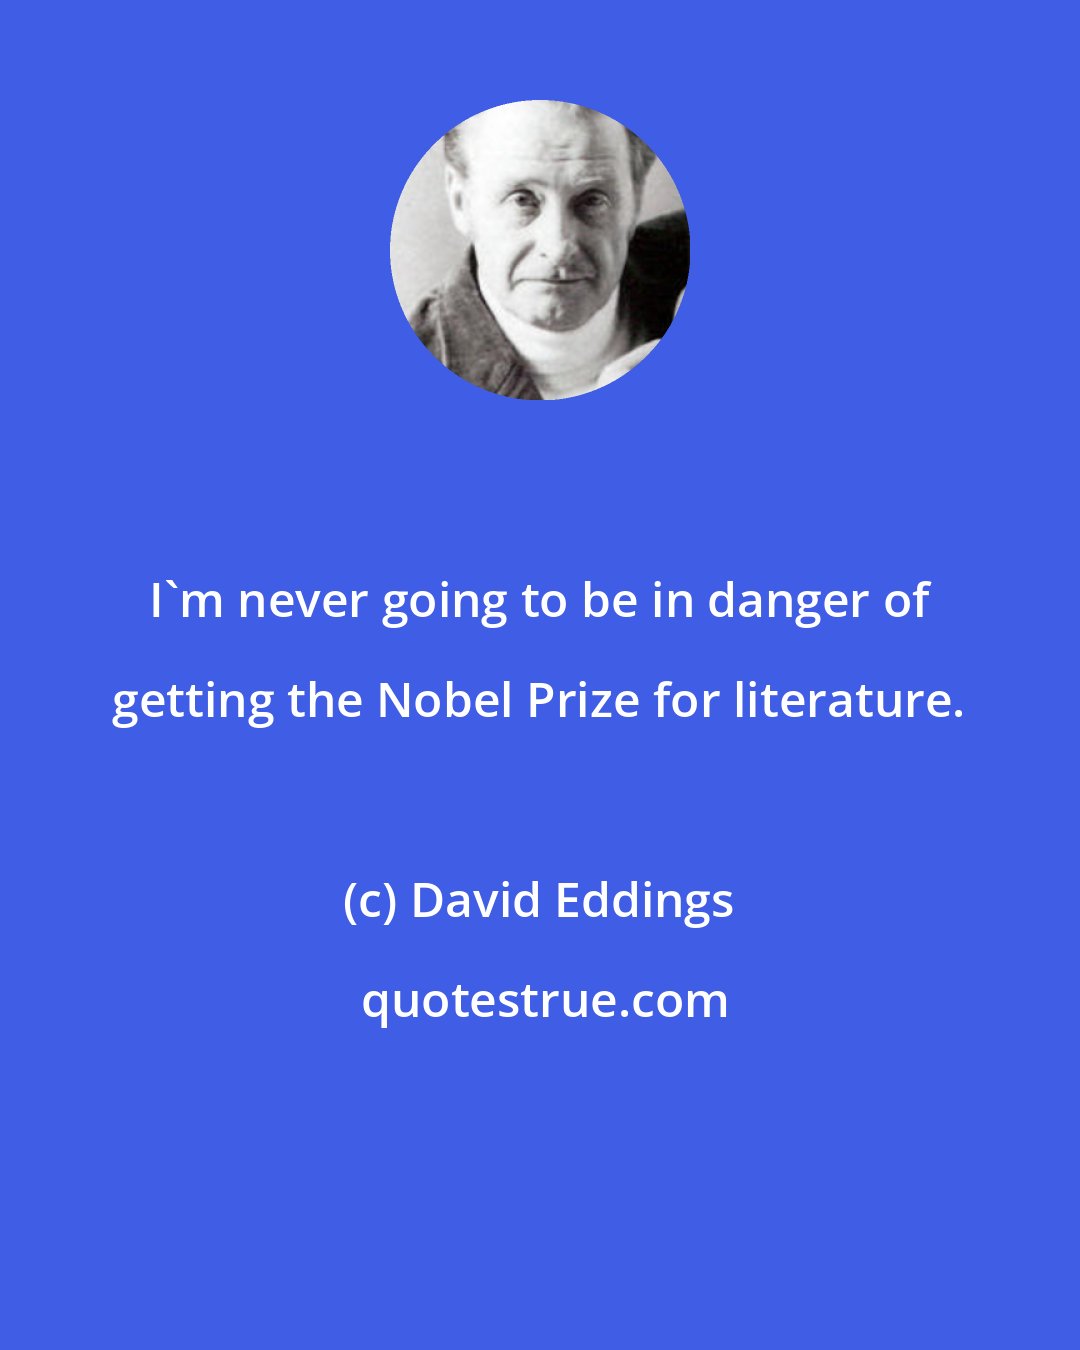 David Eddings: I'm never going to be in danger of getting the Nobel Prize for literature.